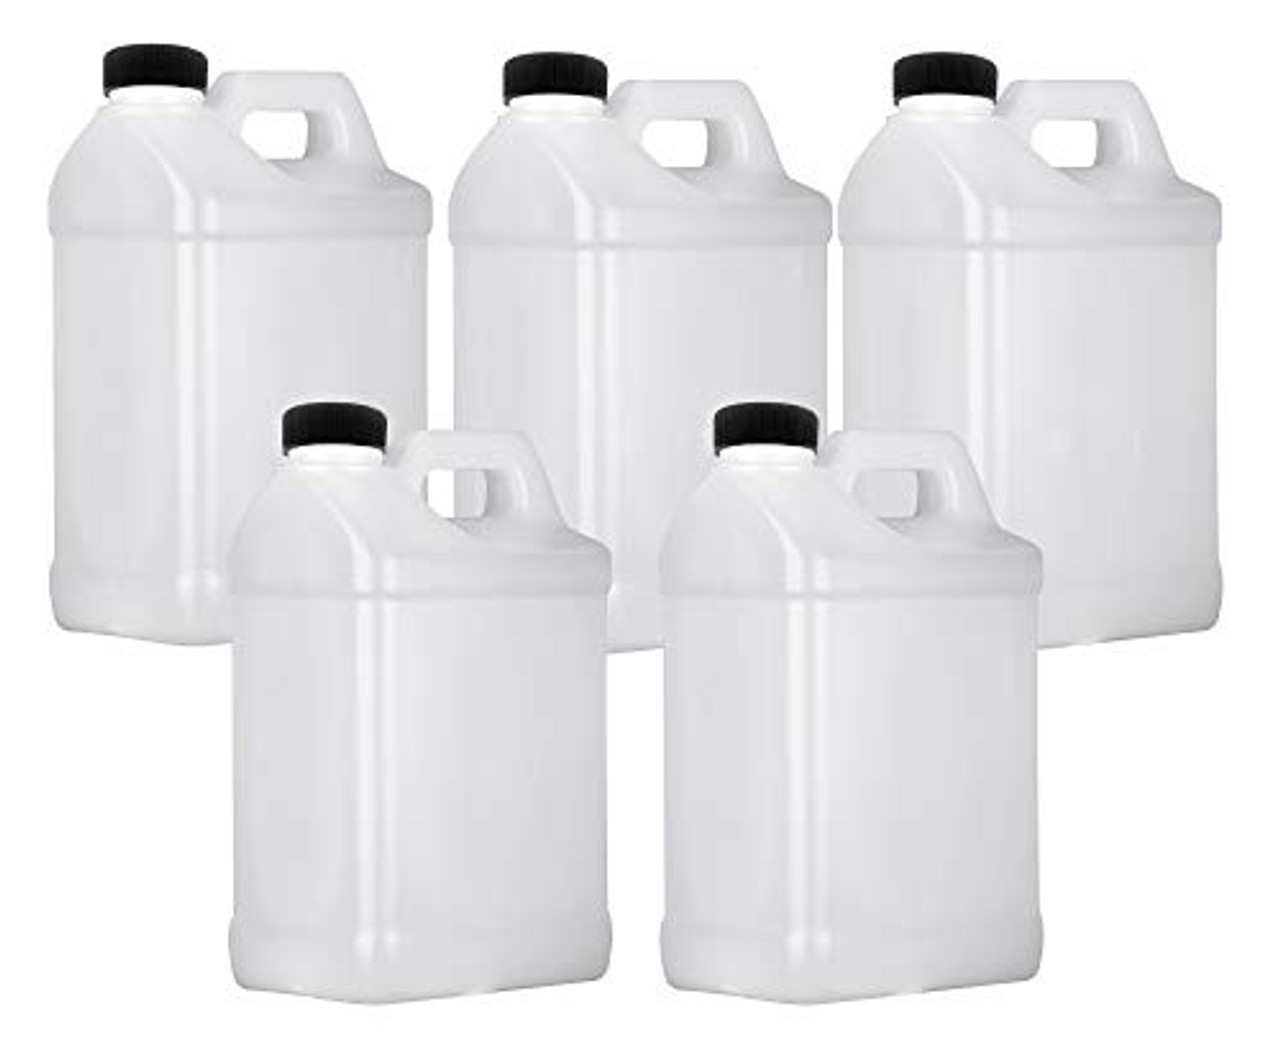 5 liter Thicken HDPE plastic Container with Lid Food Grade liquid jerry can  Leakproof water bottle